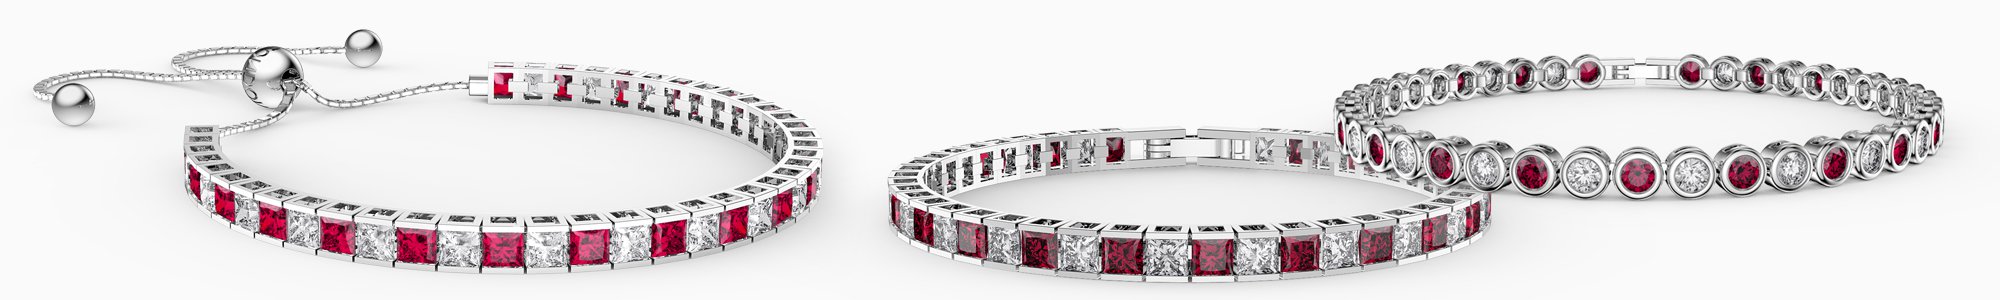 Shop Ruby Bracelets by Jian London. Buy direct and save from our wide selection of Ruby Bracelets at the Jian London jewellery Store. Free UK Delivery